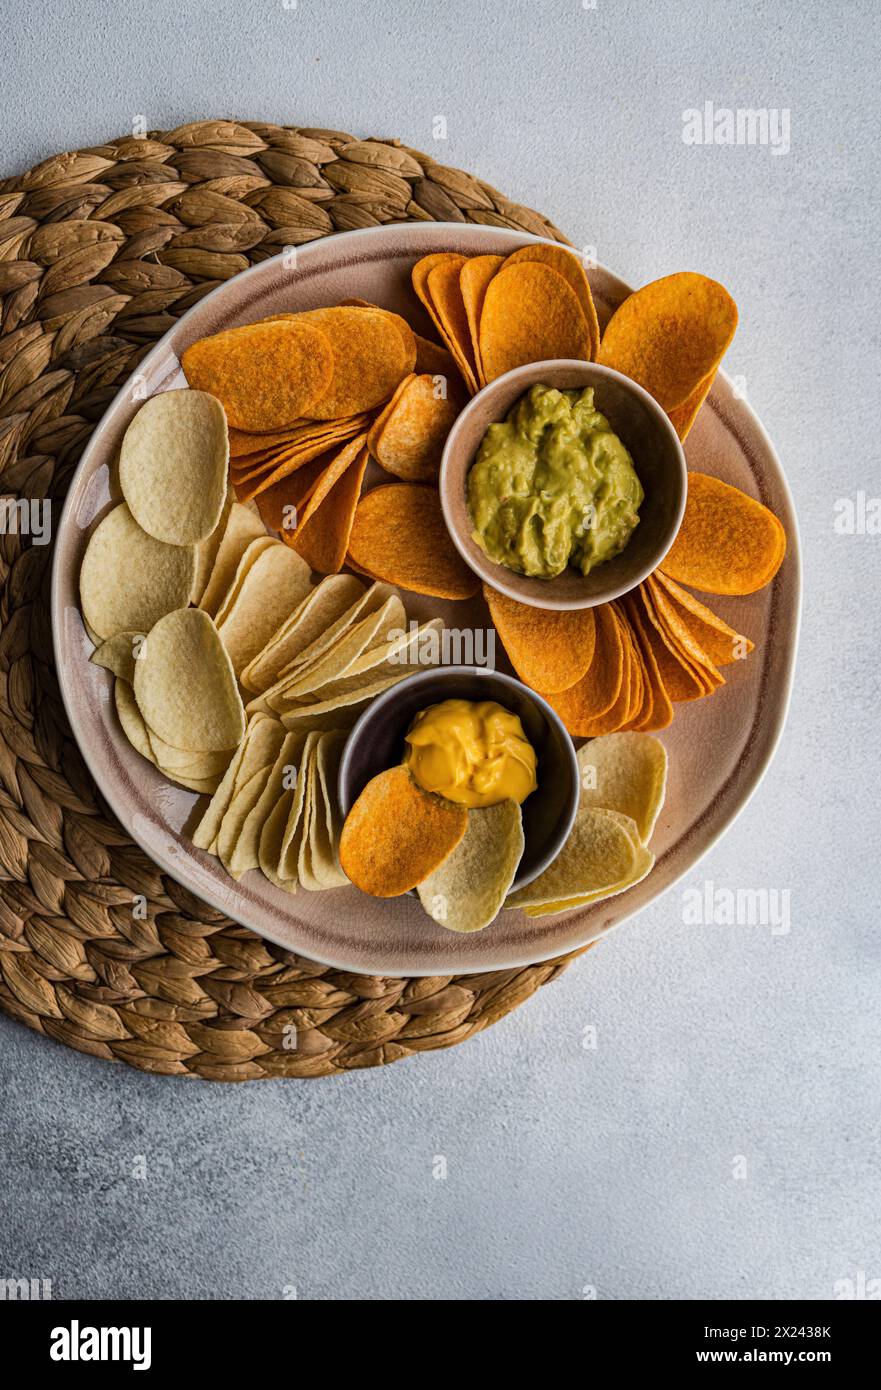 Paprika and cheese crisps with dips Stock Photo